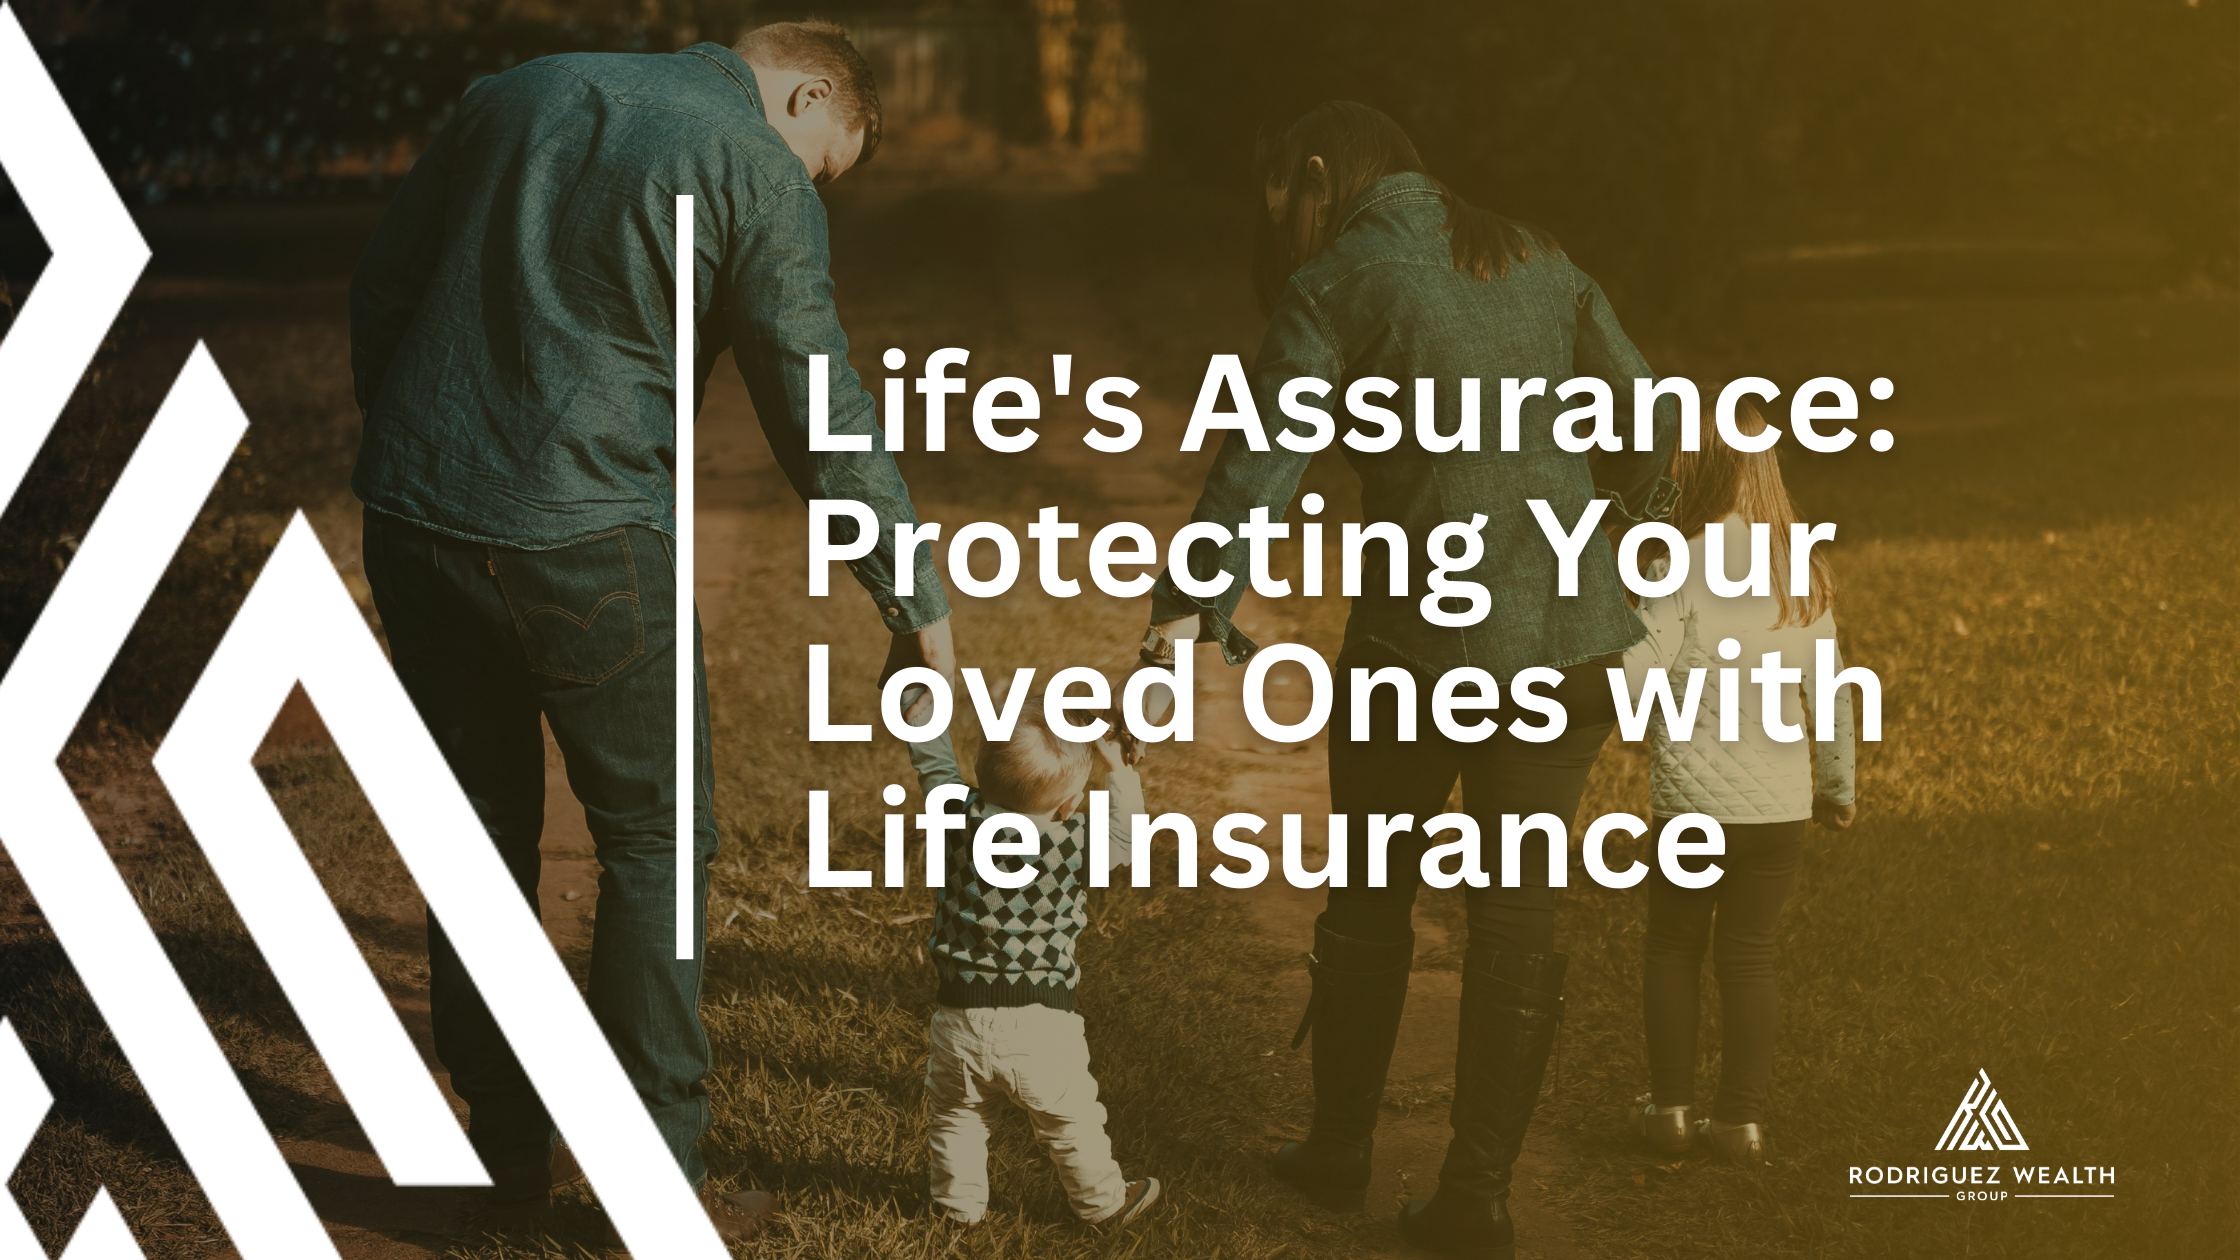 Life's Assurance: Protecting Your Loved Ones with Life Insurance